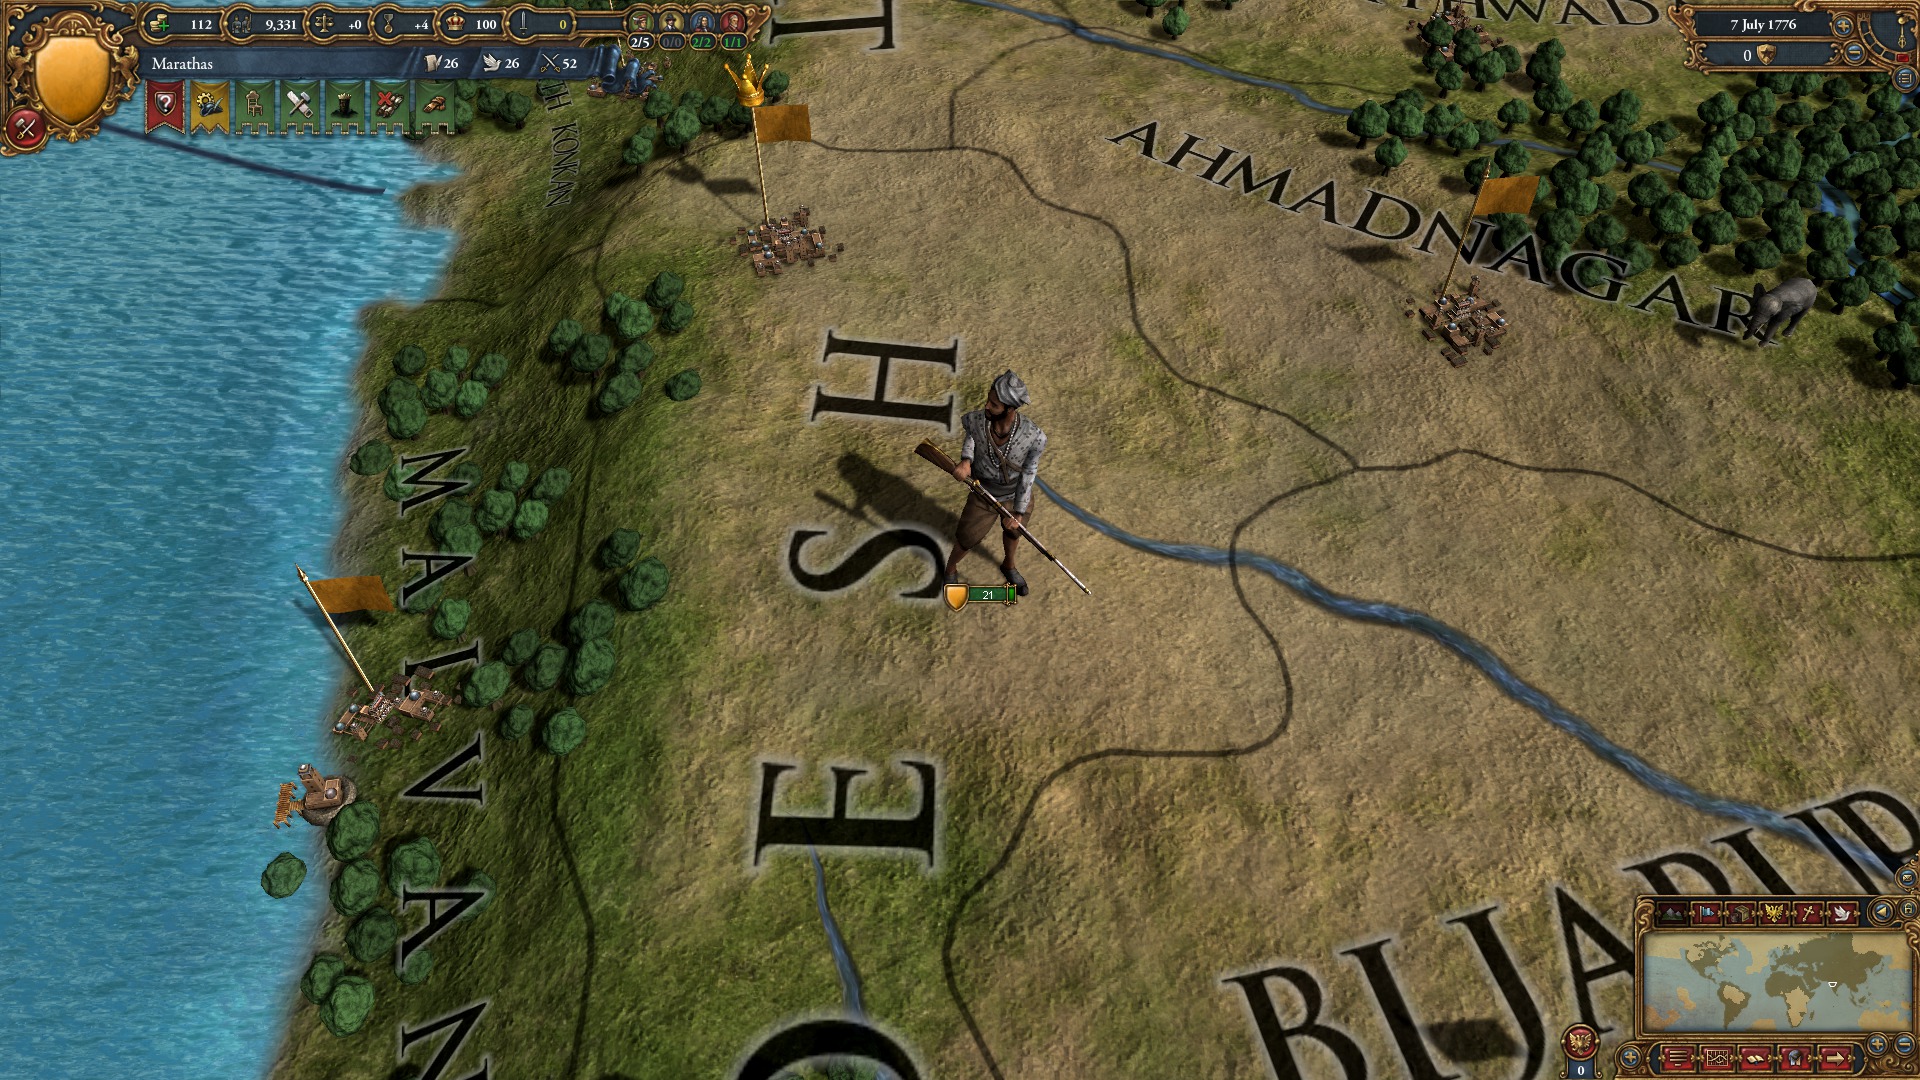 Europa Universalis IV: Indian Subcontinent Unit Pack Featured Screenshot #1